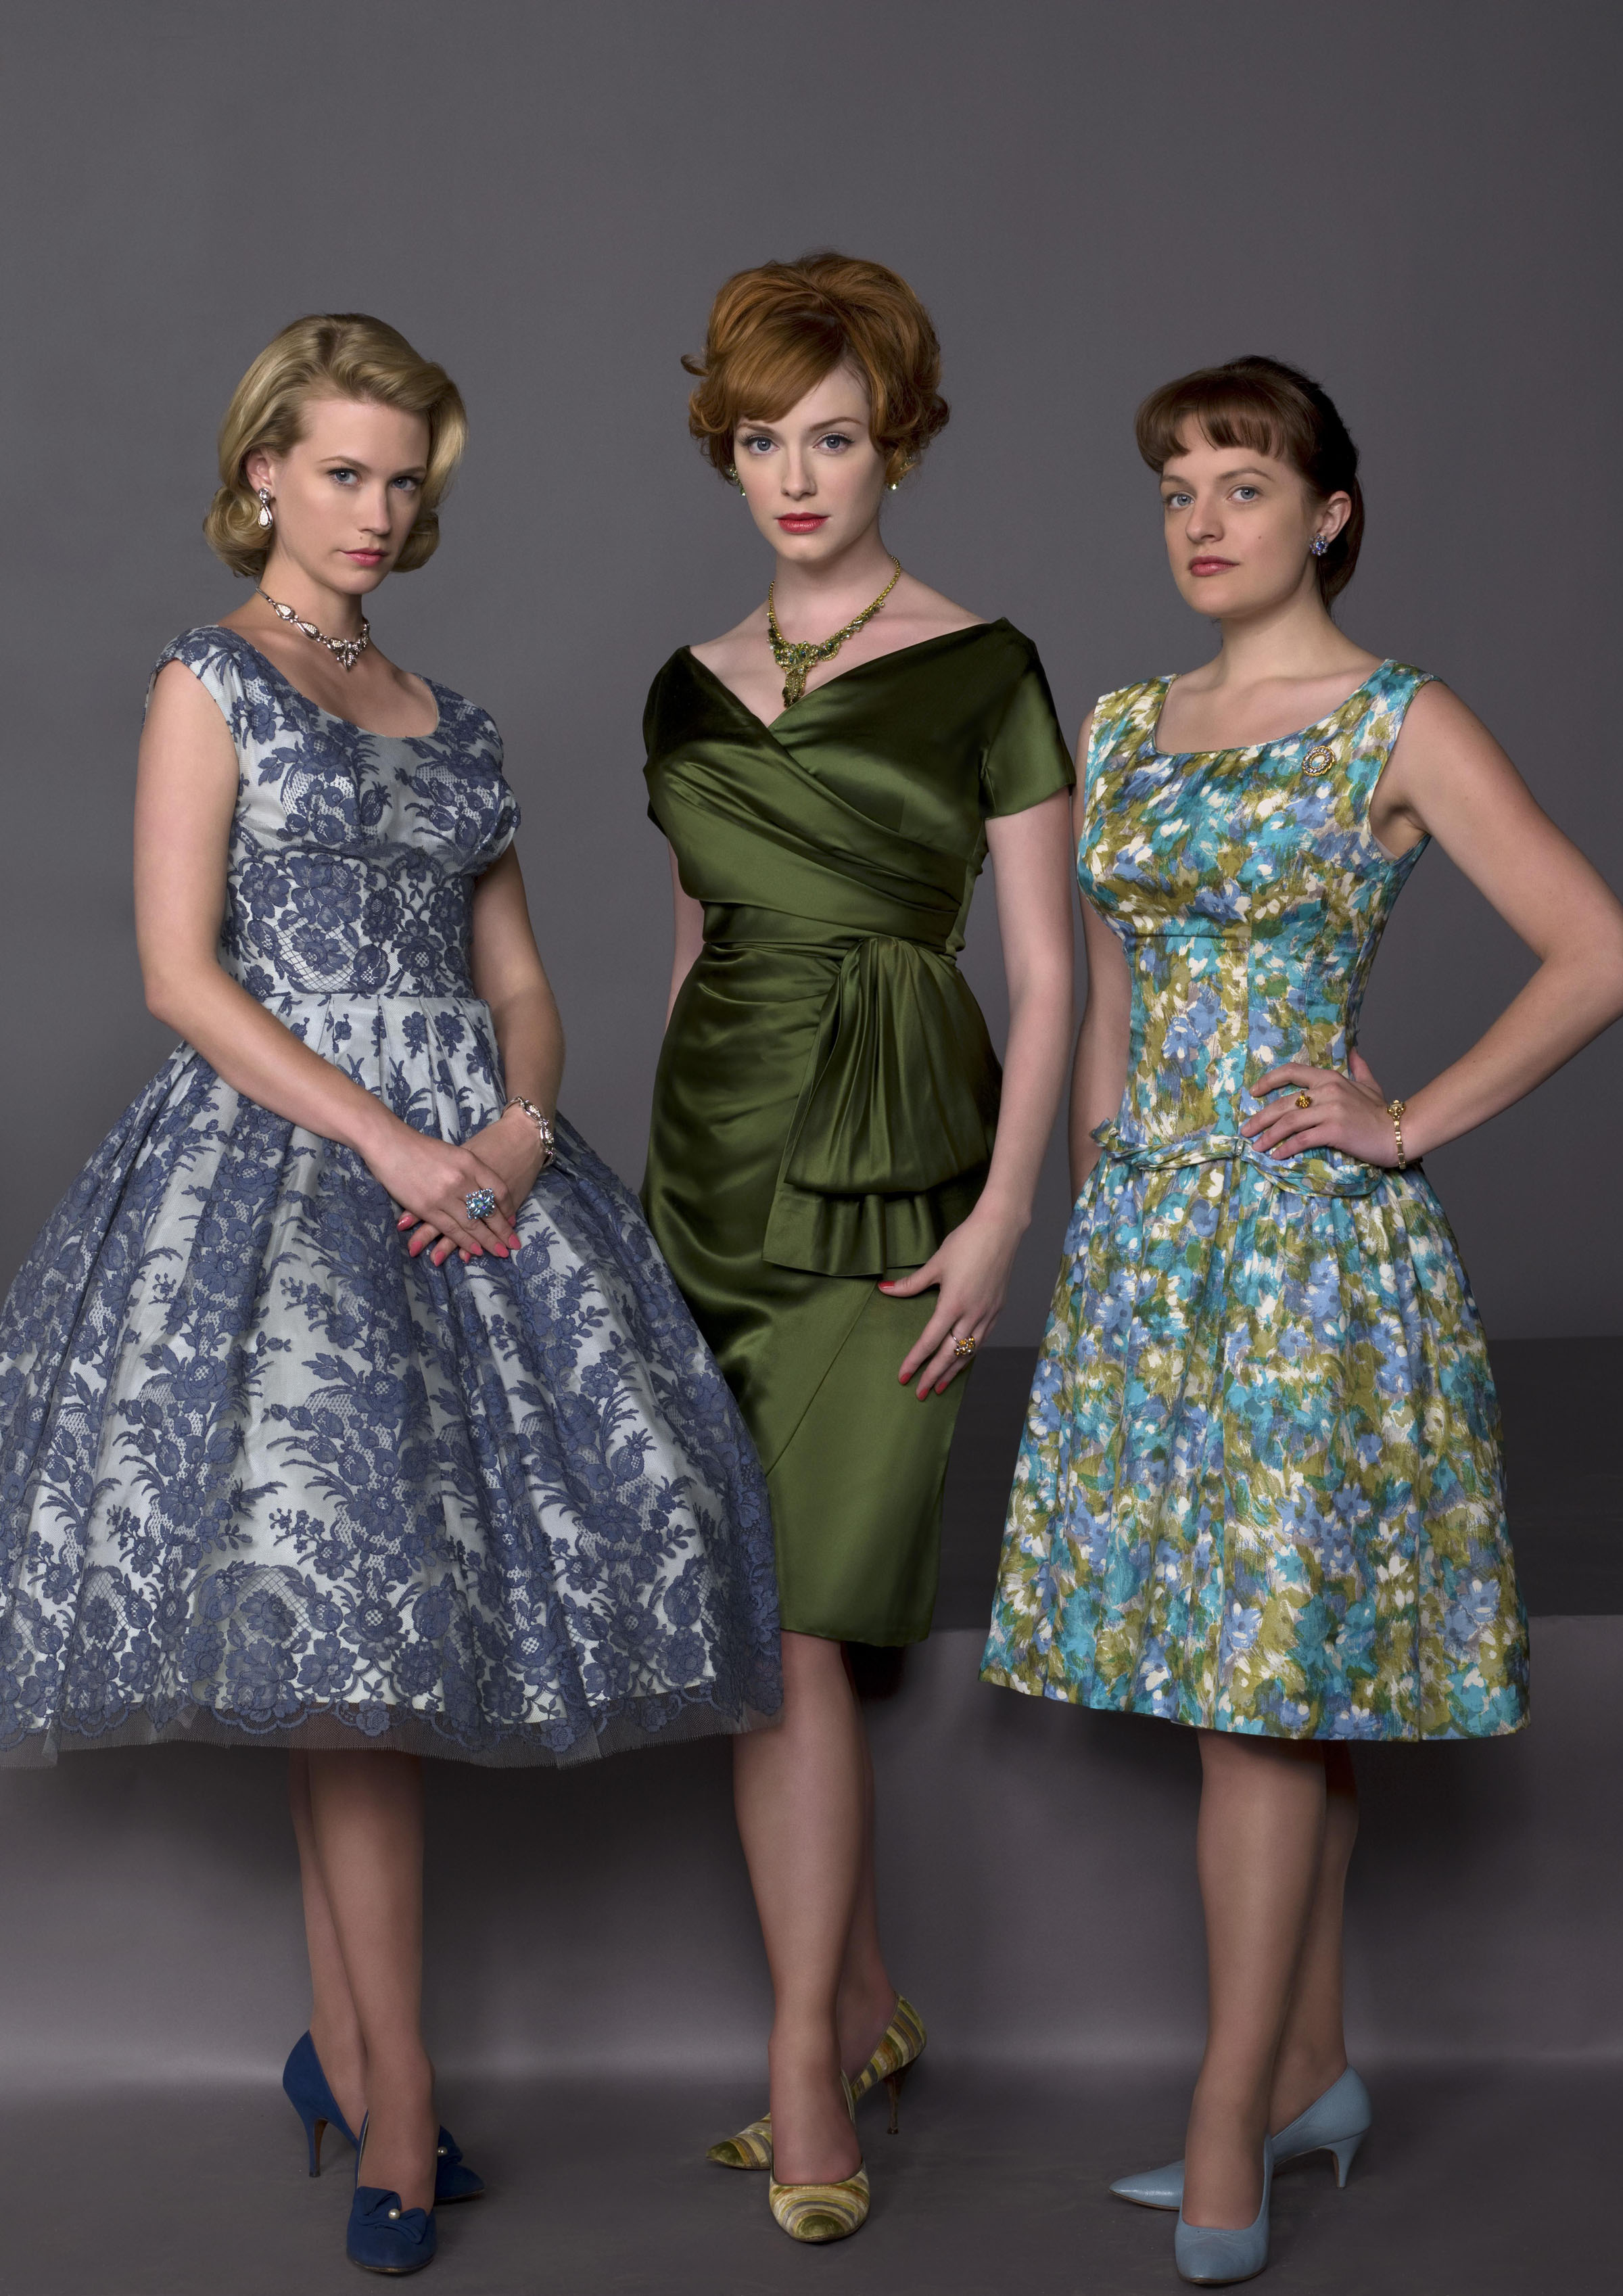 The Women of Mad Men - Dress the Part - Who do you want to be